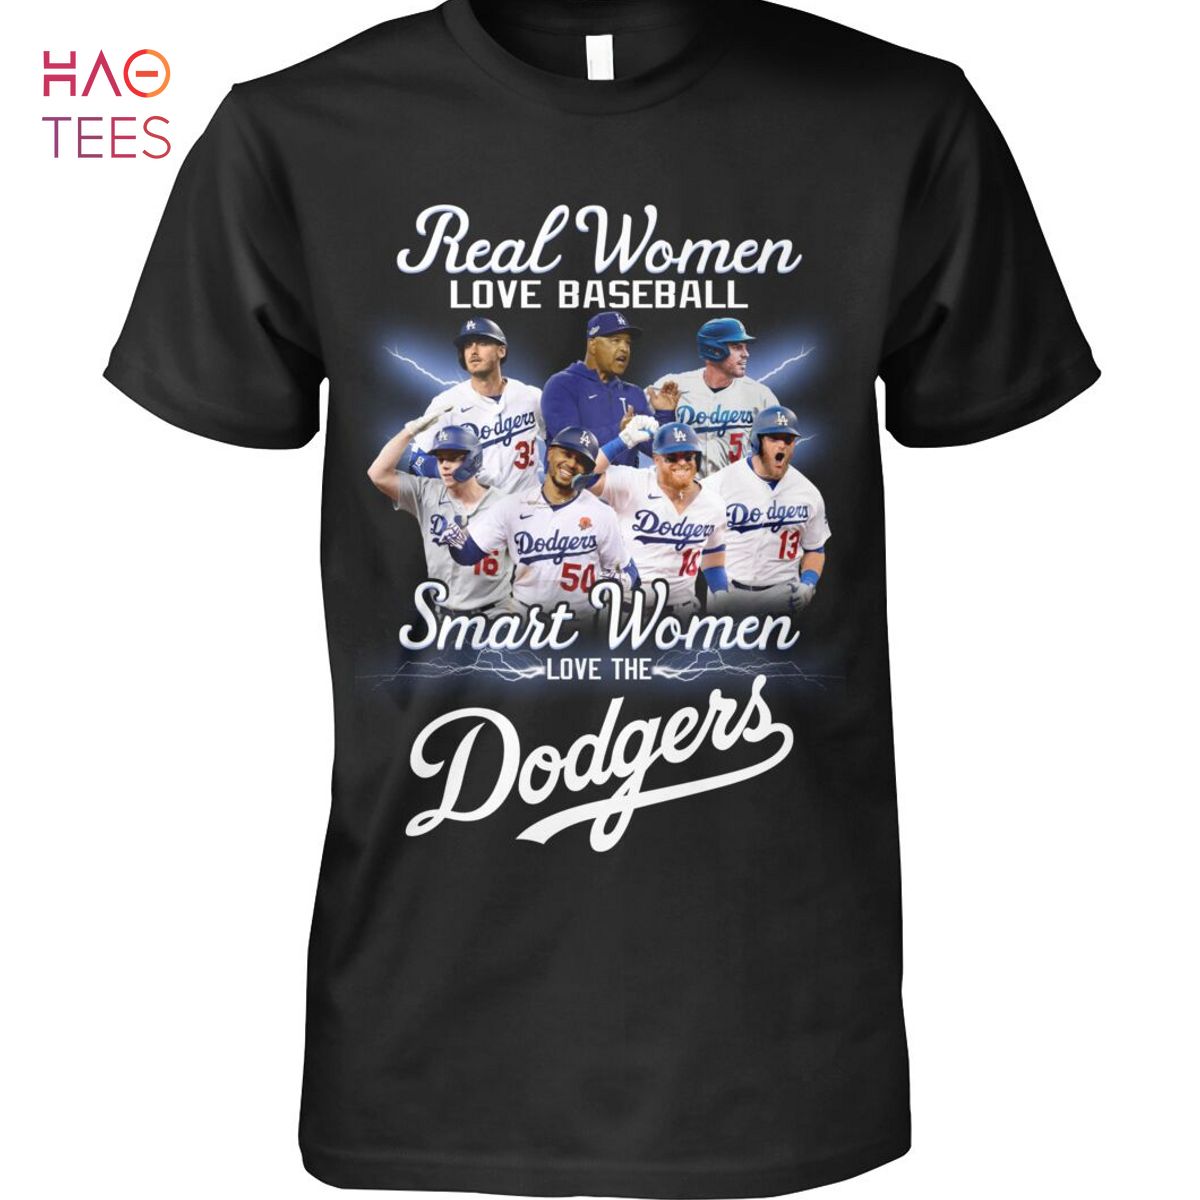 los angeles dodgers womens jersey